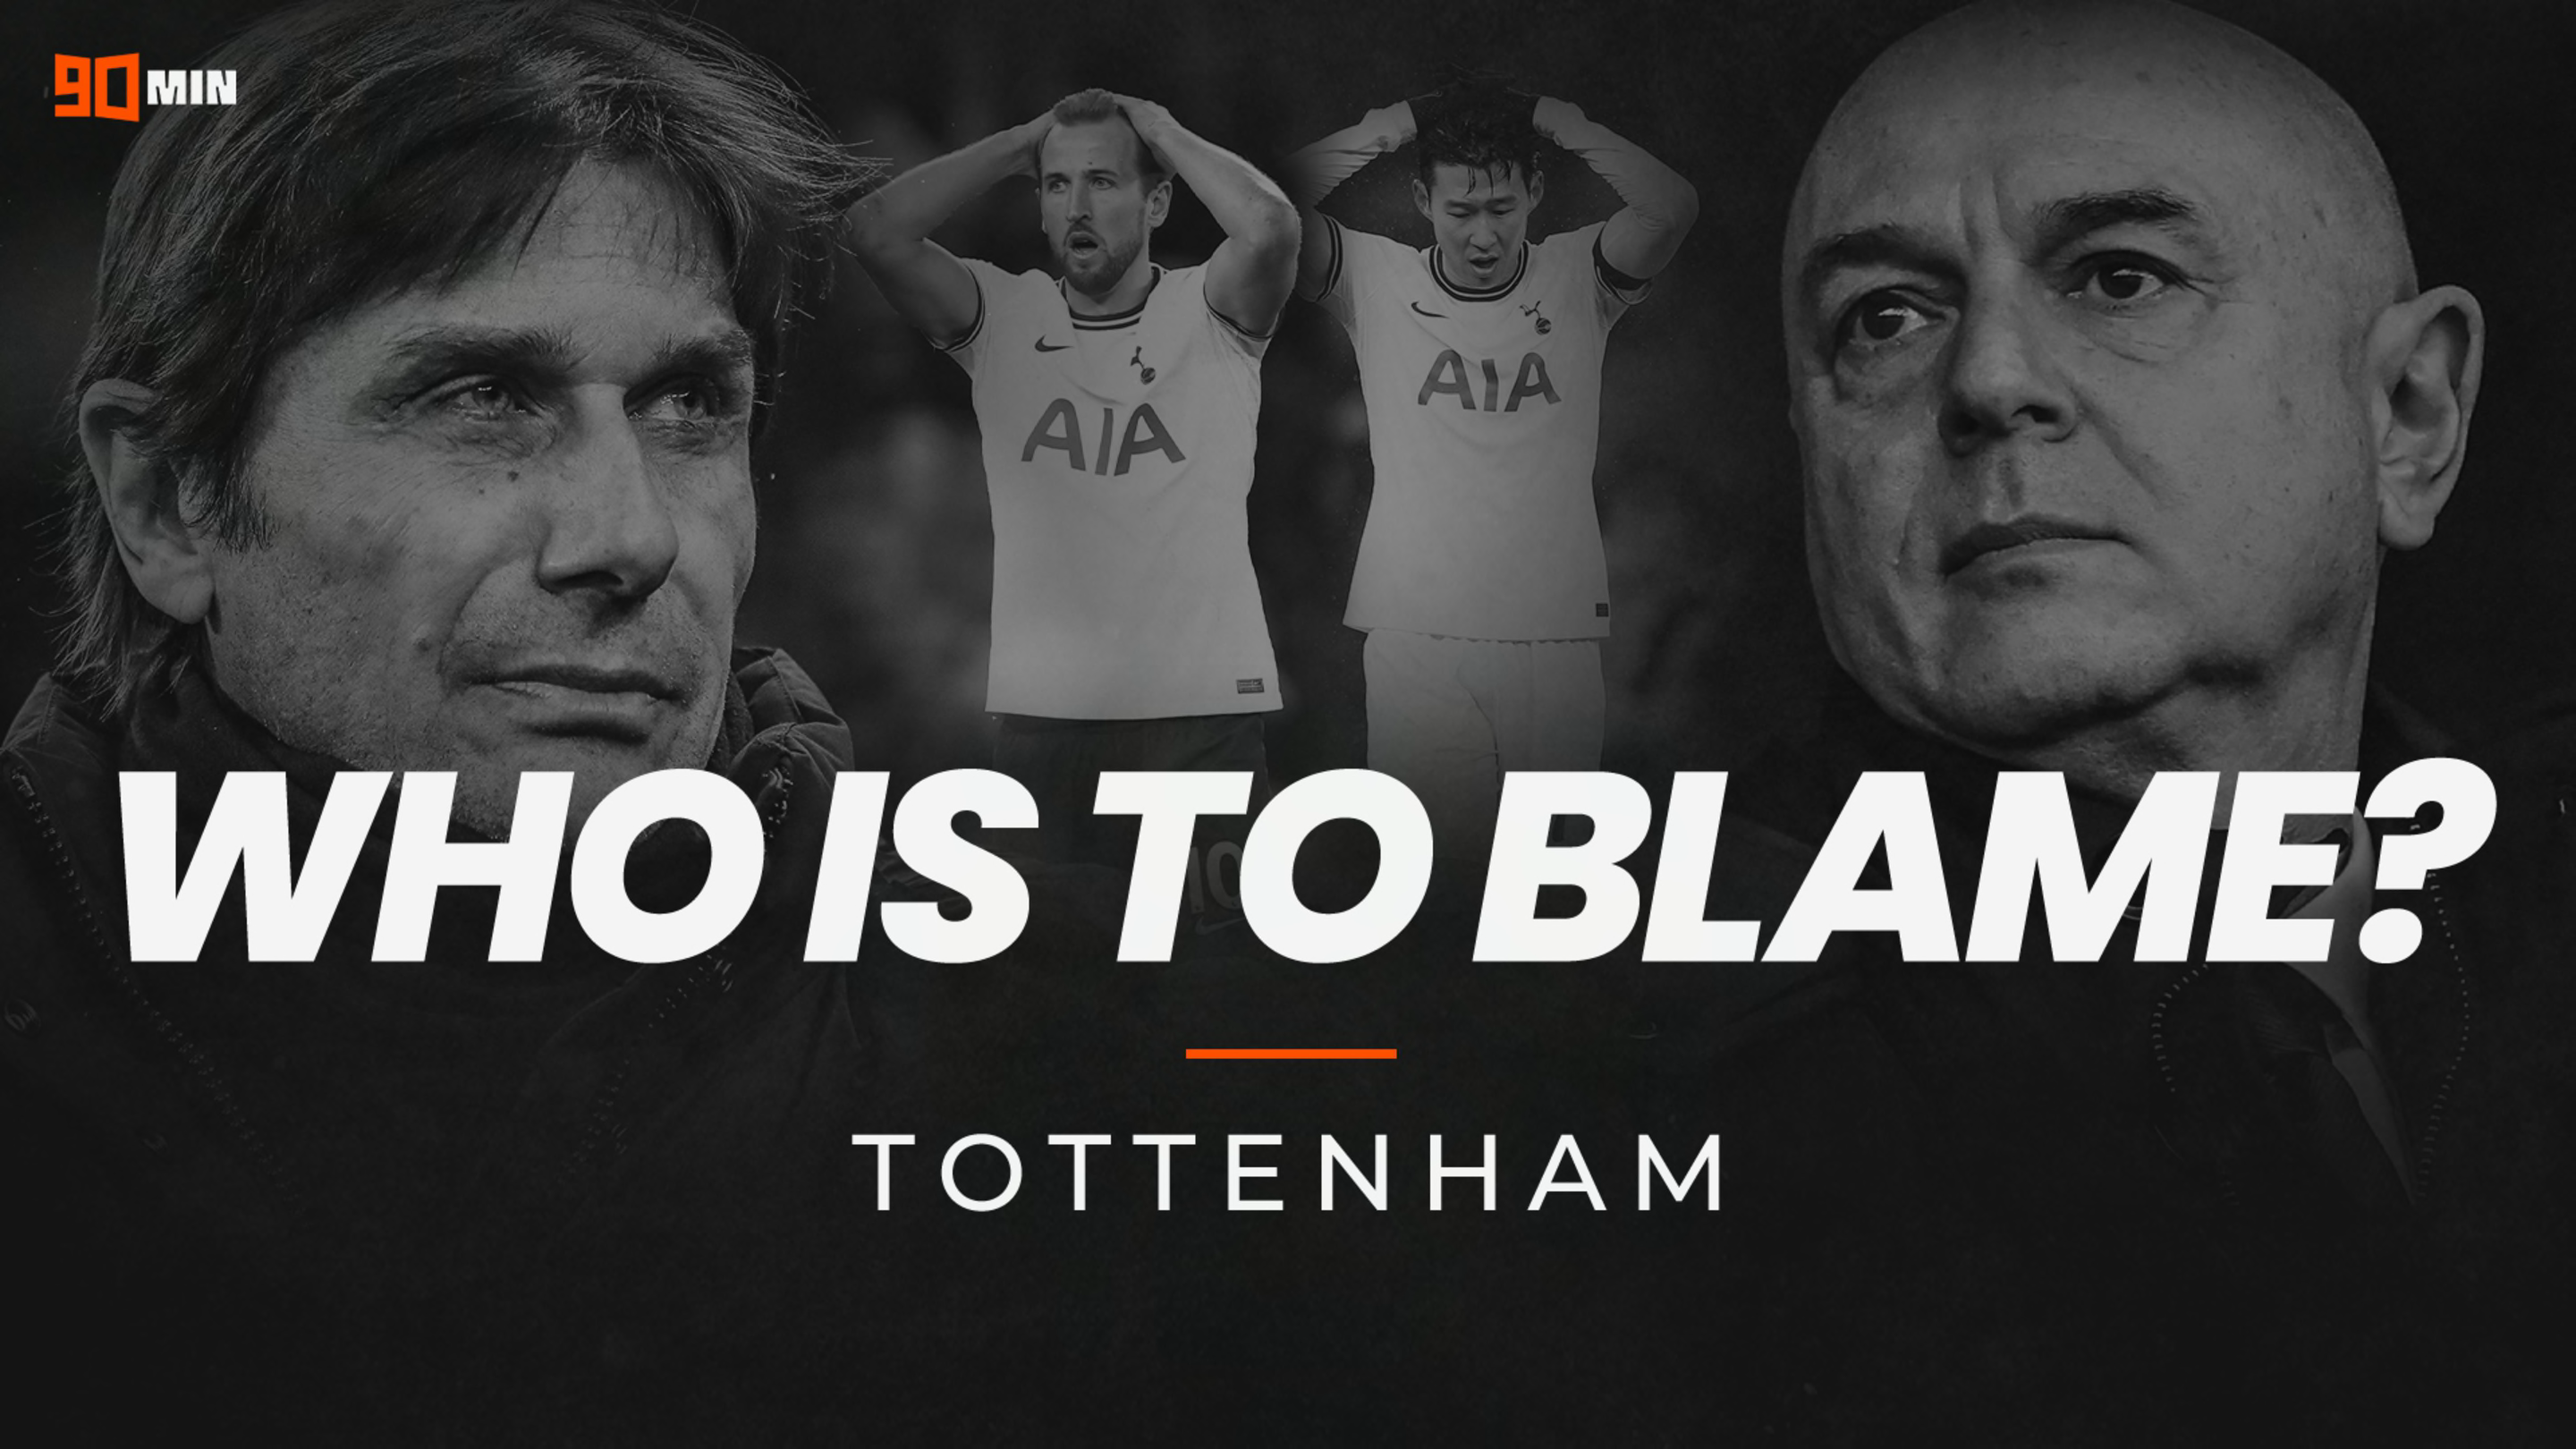 Tottenham Hotspur: Who is to blame?